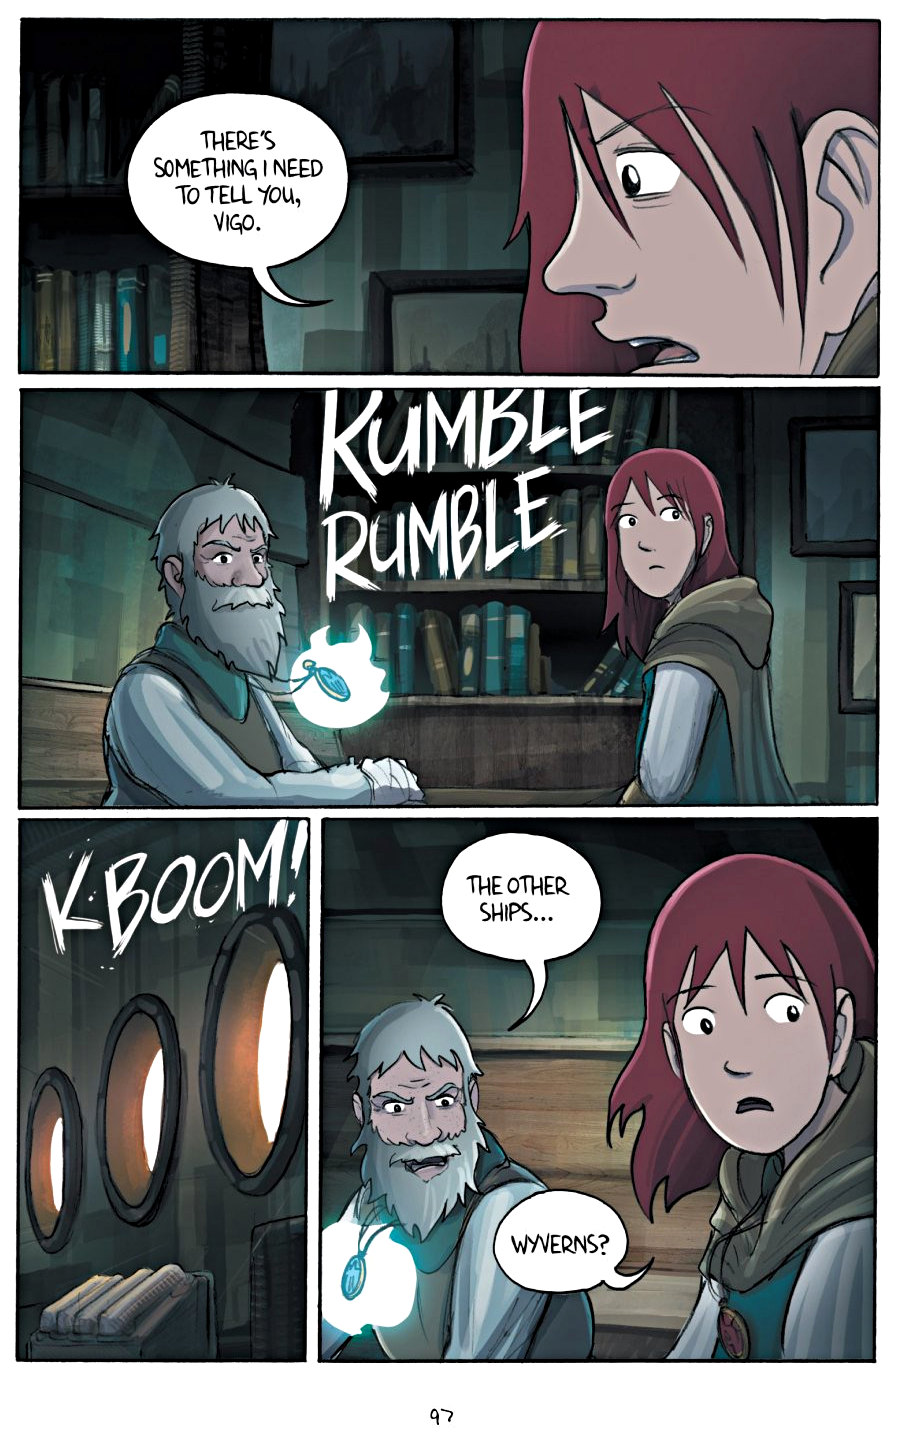 page 97 of amulet 5 prince of the elves graphic novel